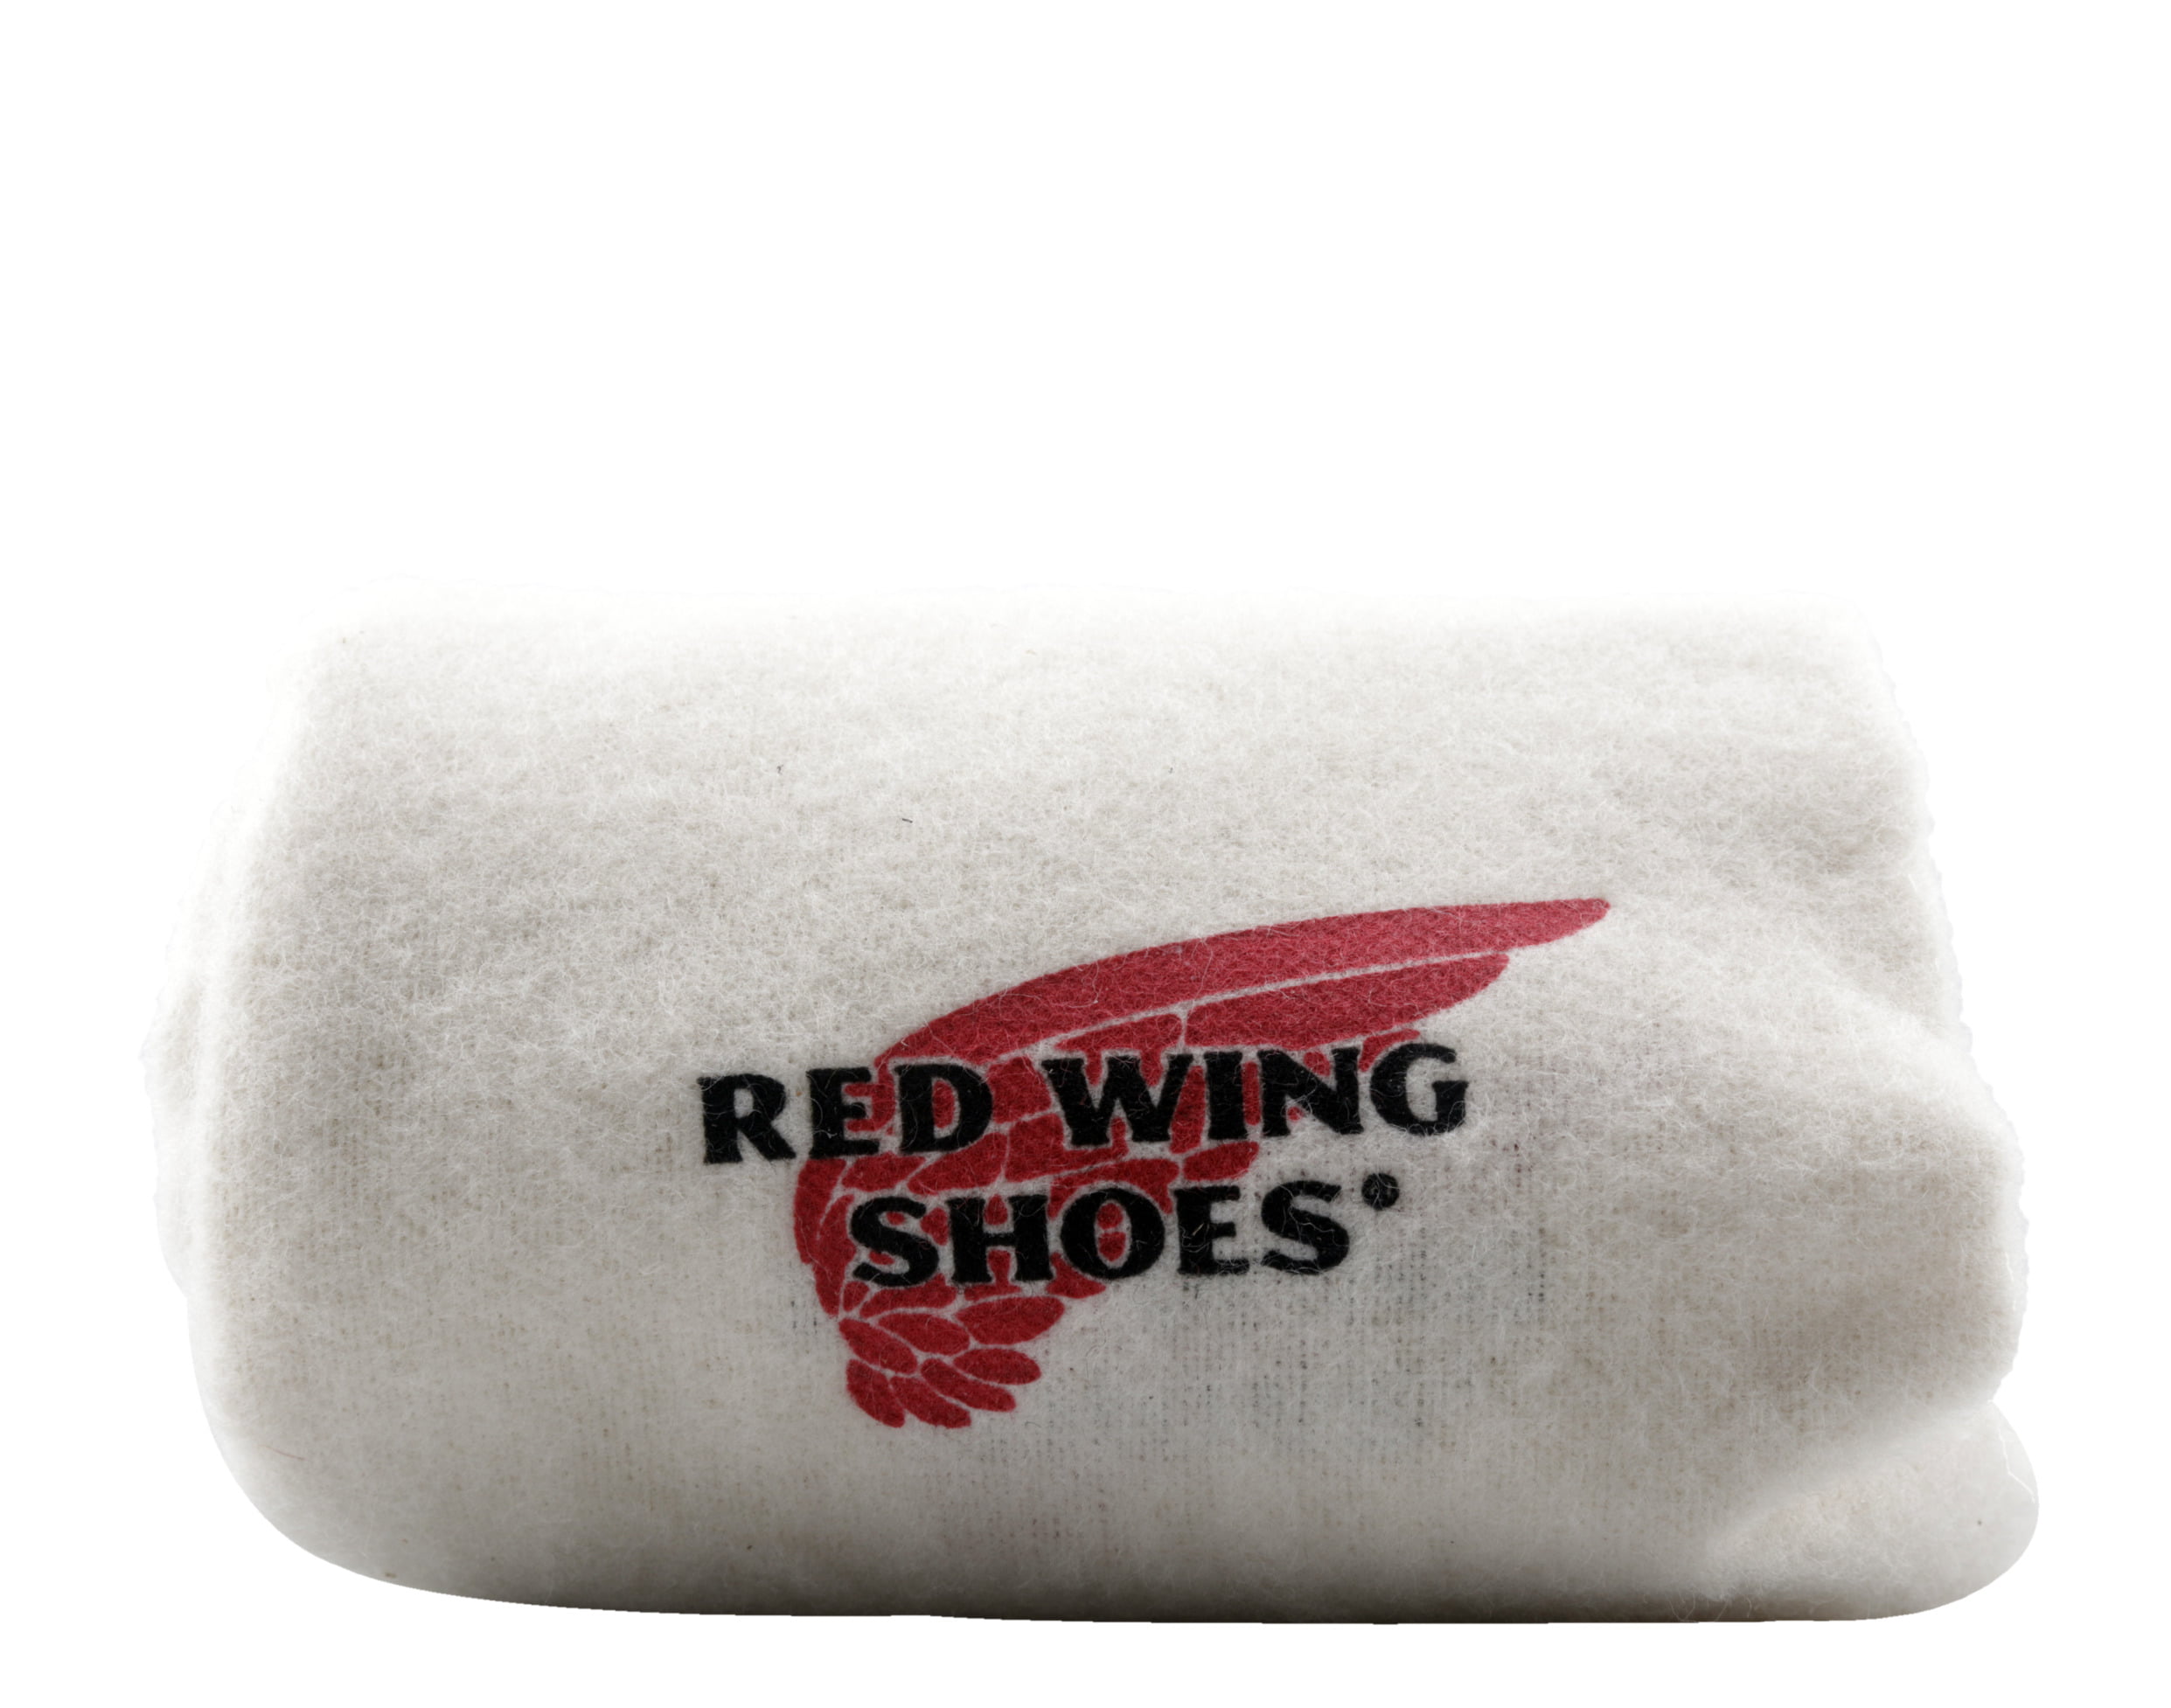 red wing leather travel care kit